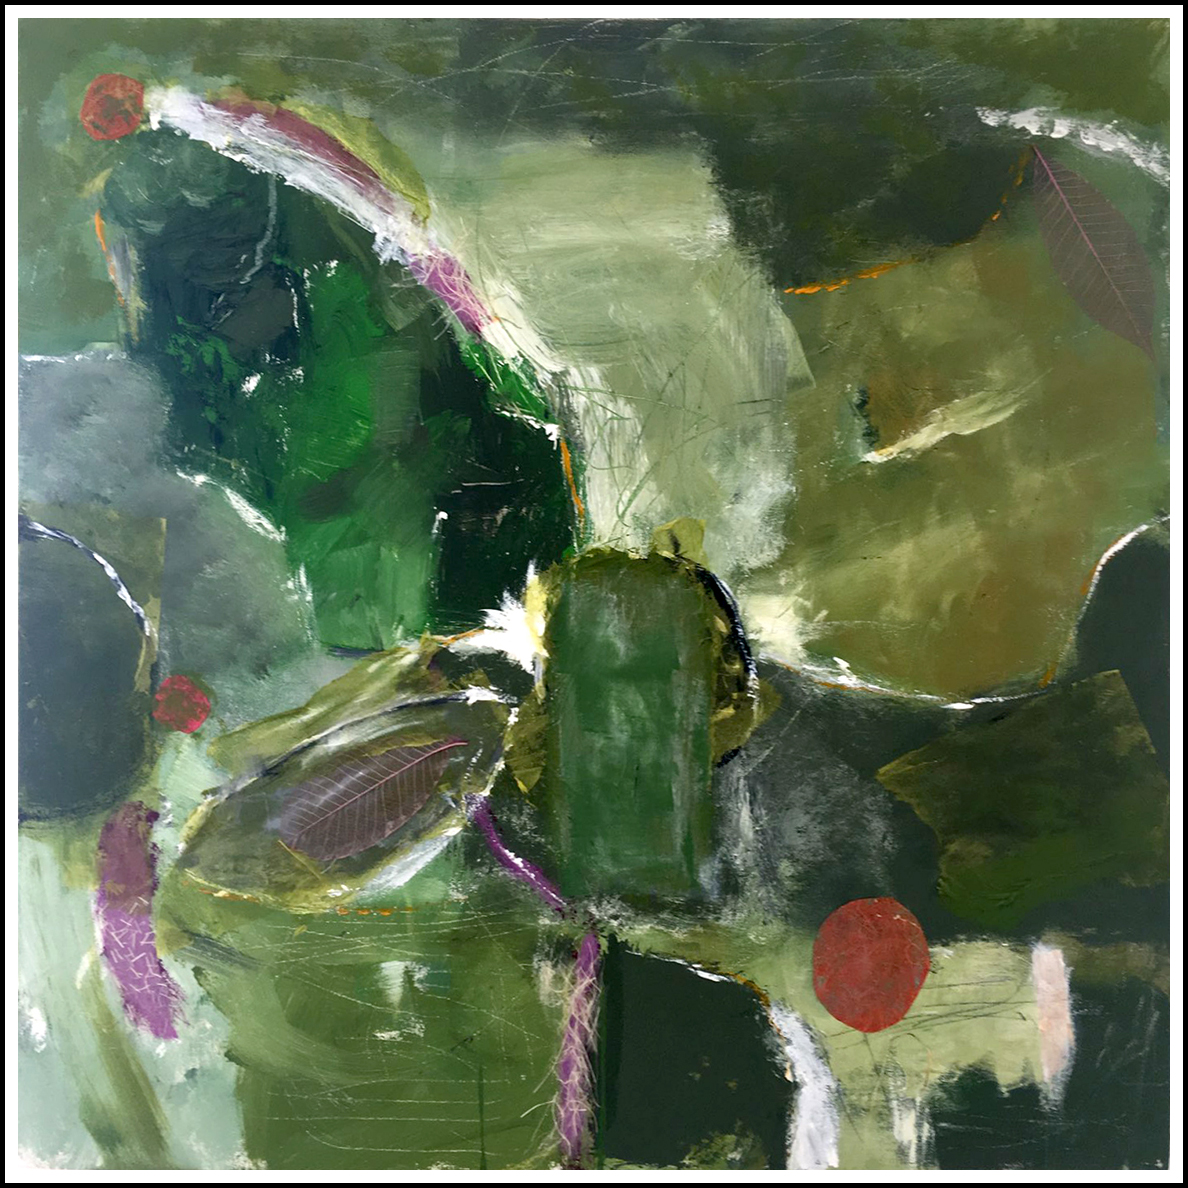   LINDSAY GREEN   30” x 30” acrylic, collage.  SOLD  